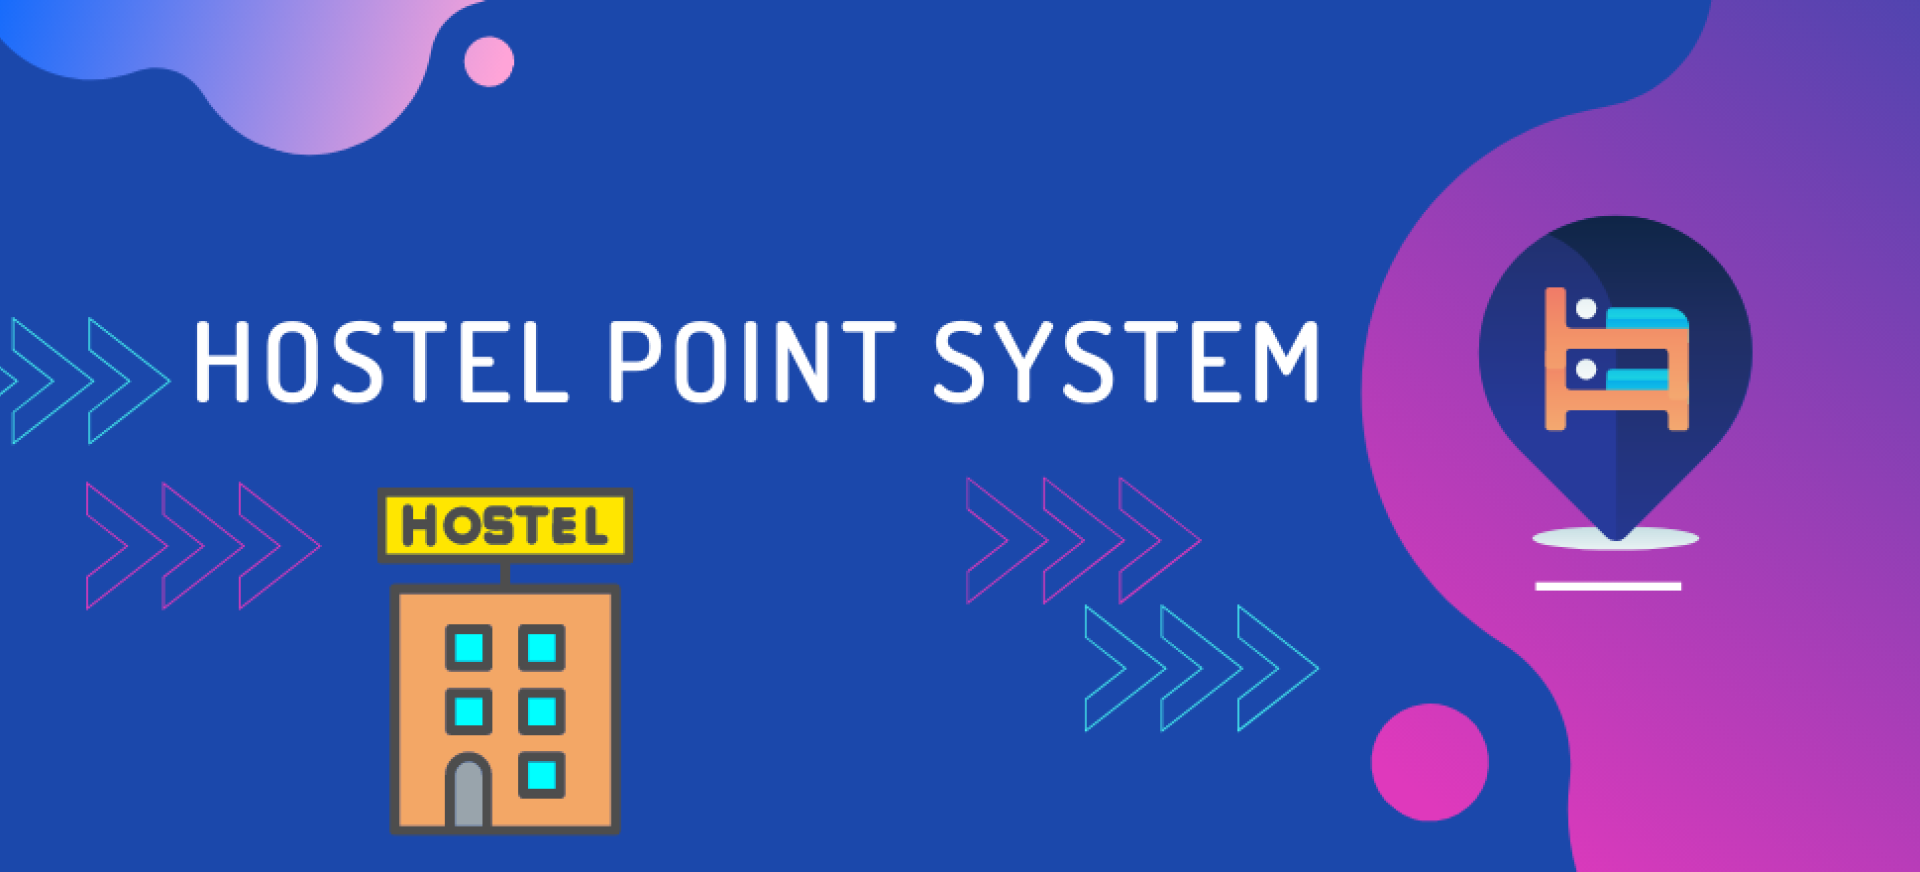 Issue 13 - Hostel Point System